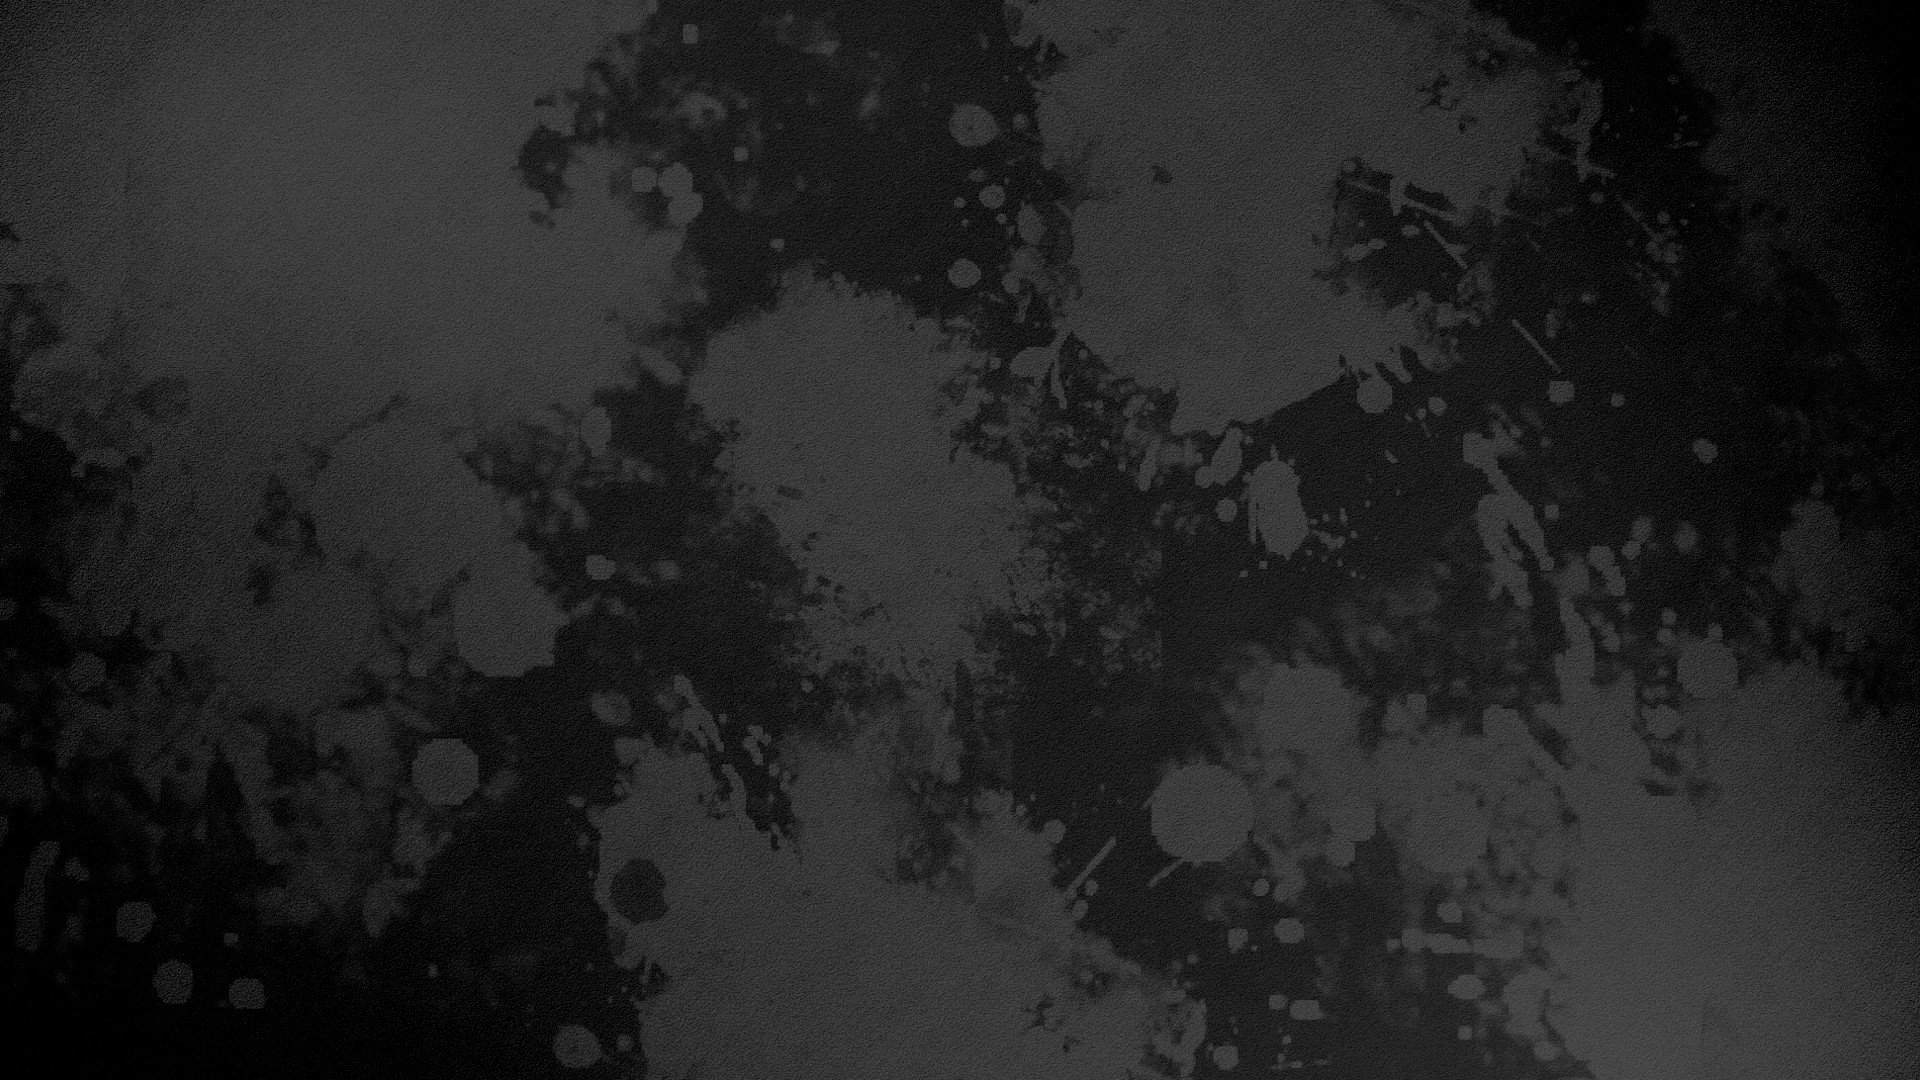 Abstract Black Grunge Textures Download